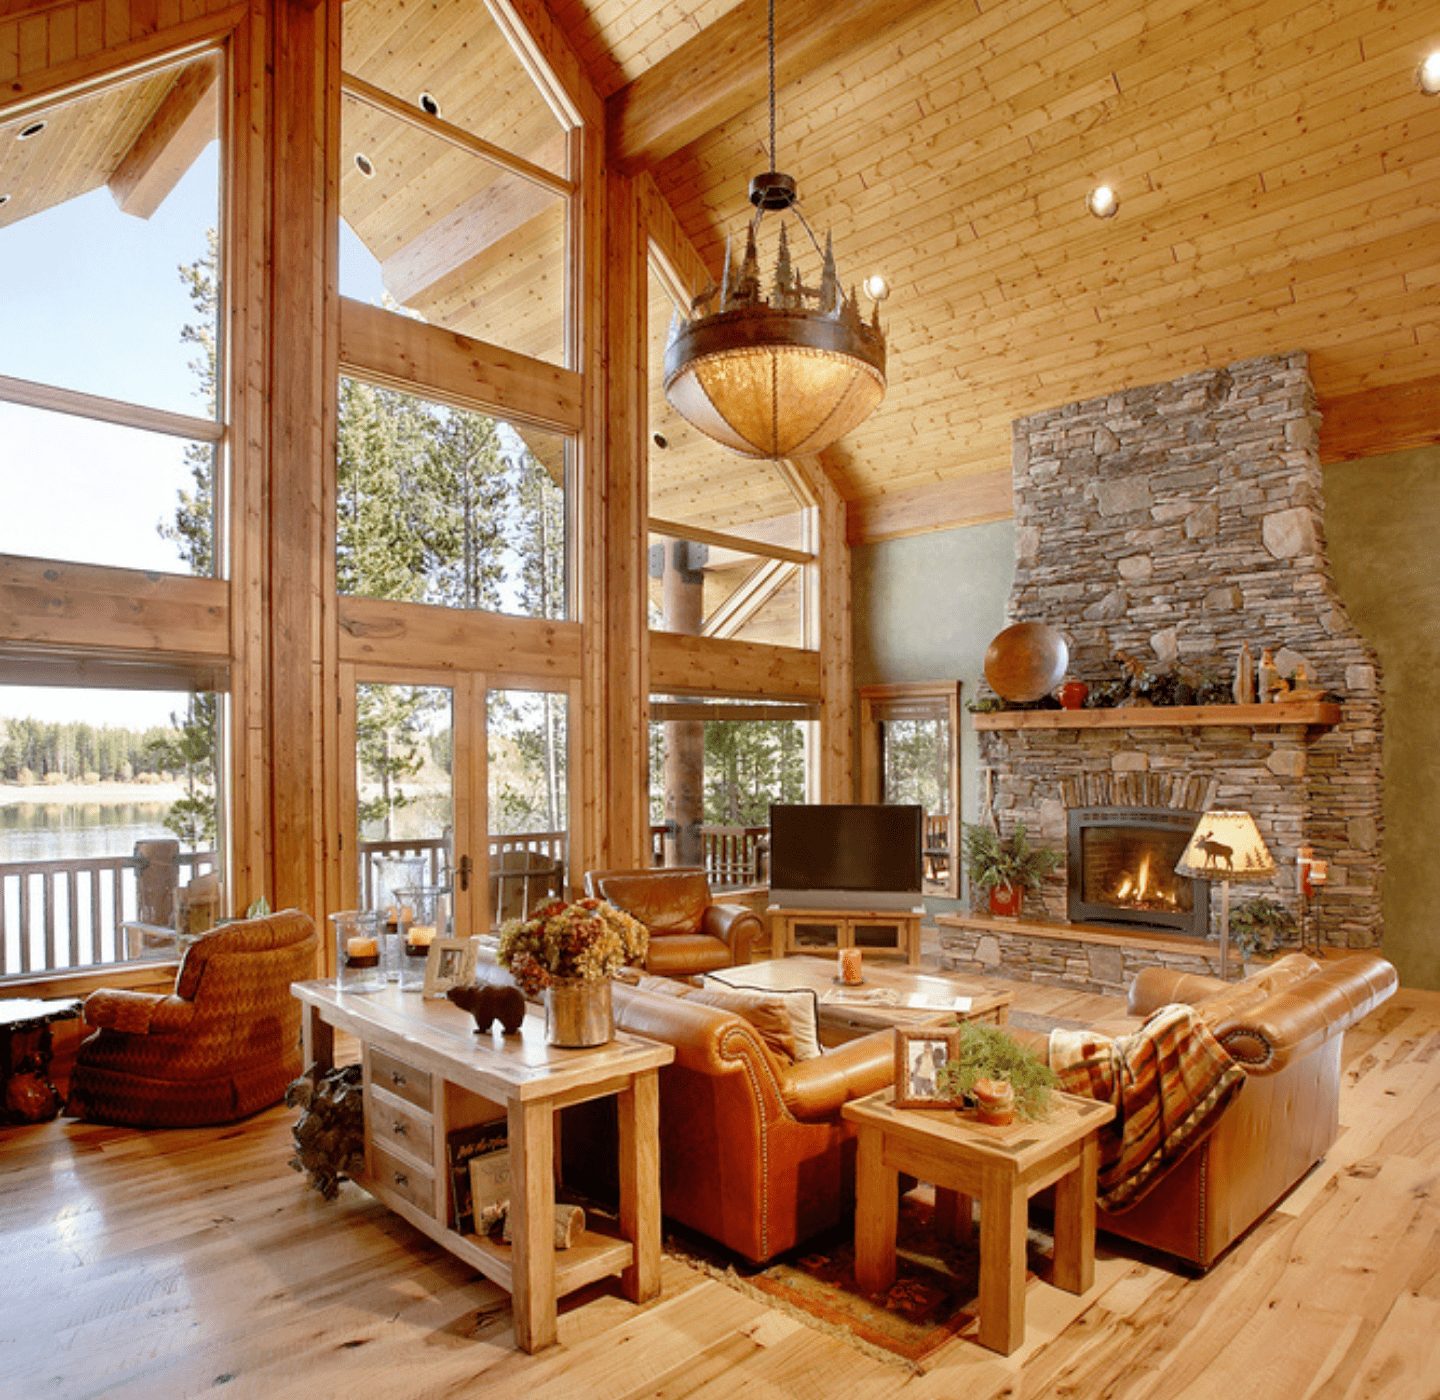 The 25 Best Rustic Cabin Decor Ideas on